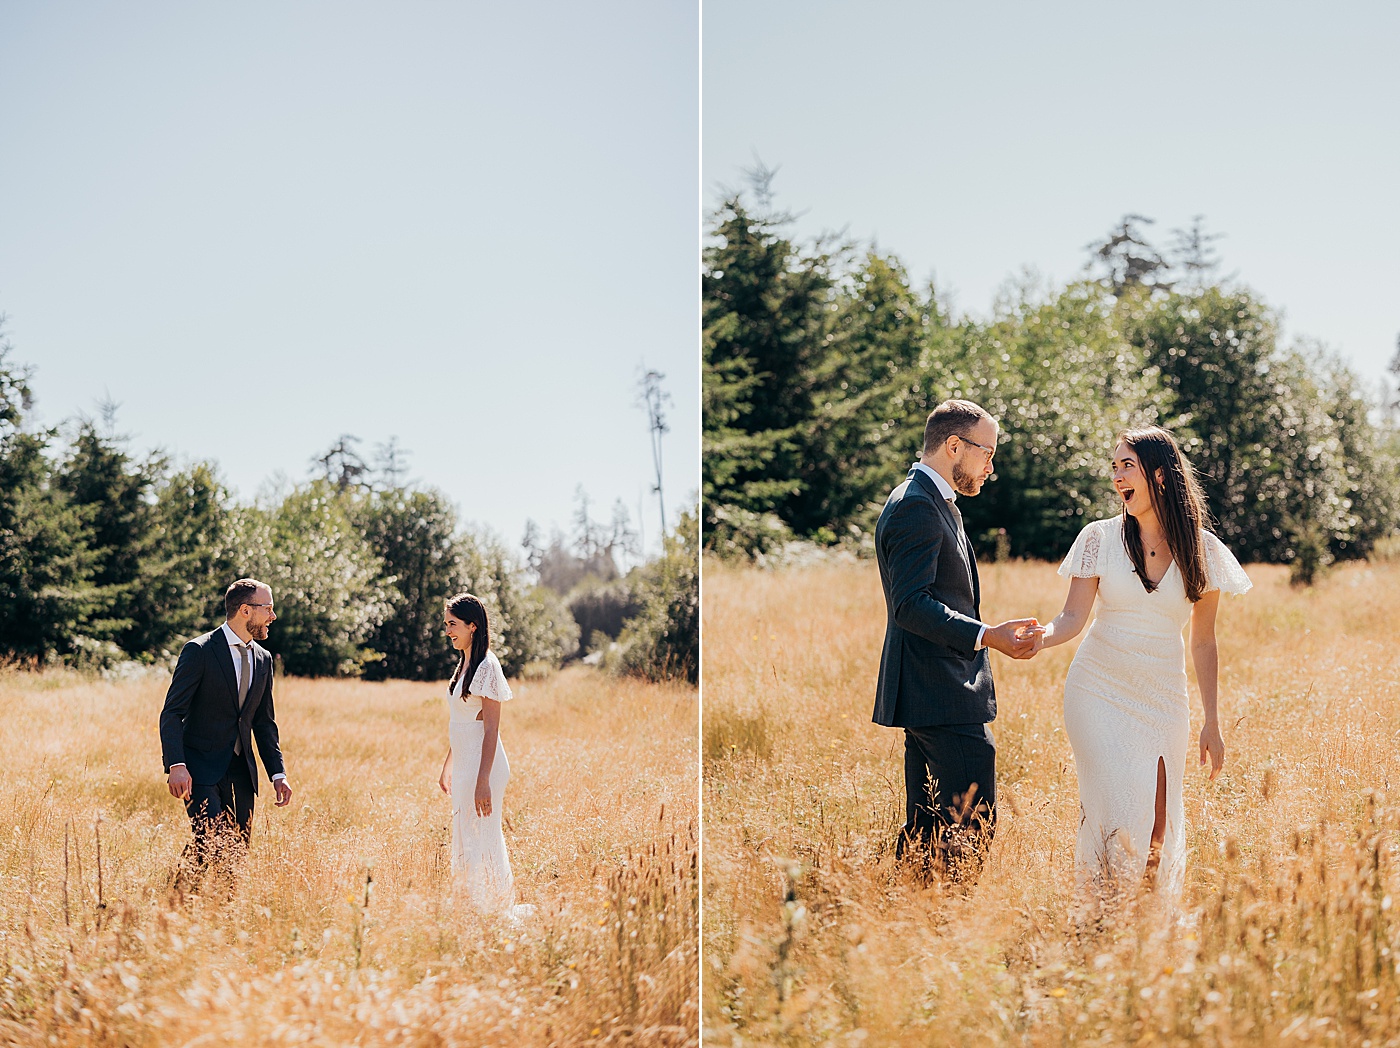 Bride and groom first look | Megan Montalvo Photography